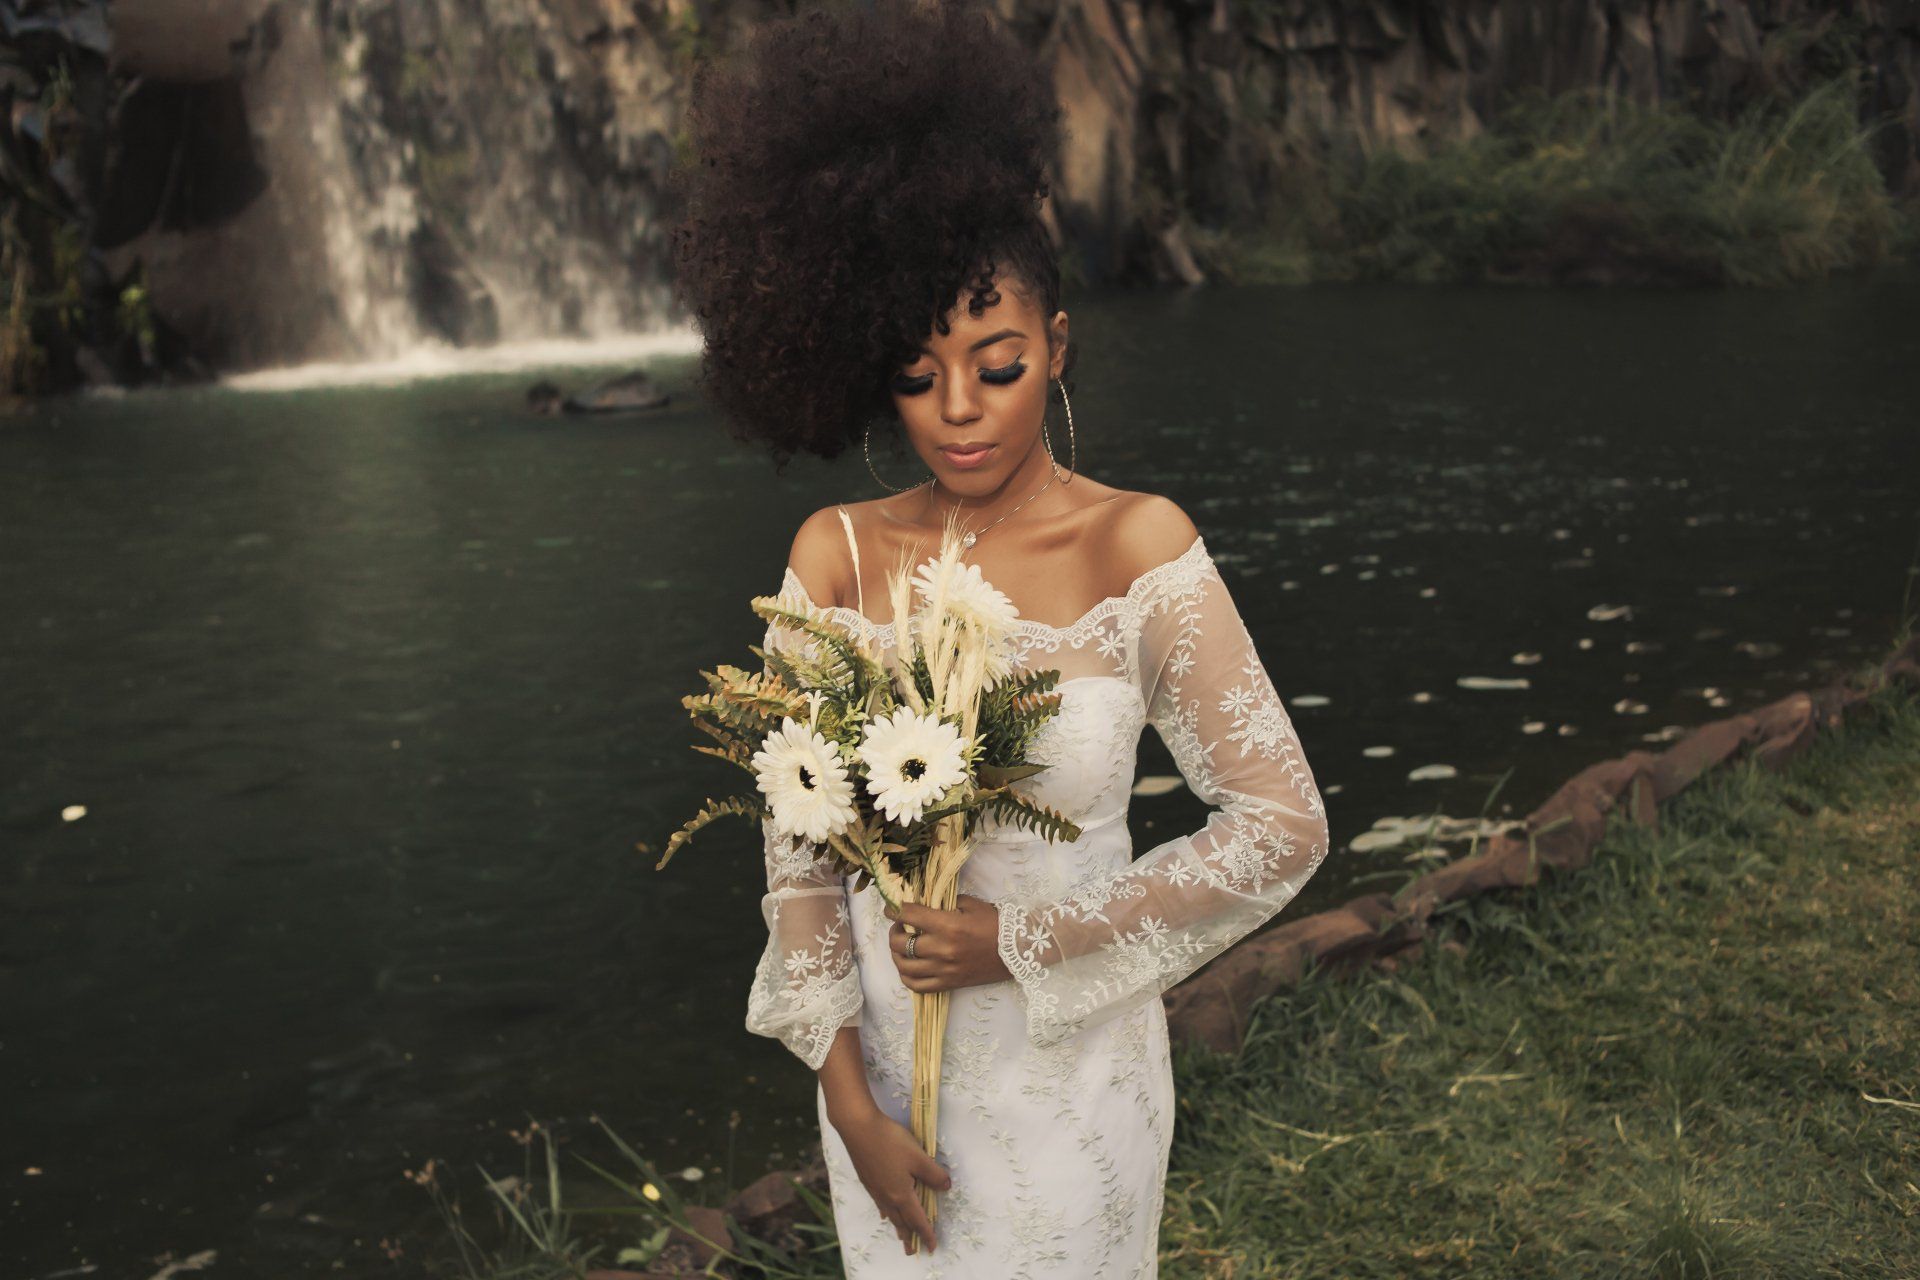 A woman in a wedding dress is holding a bouquet of flowers in front of a waterfall.